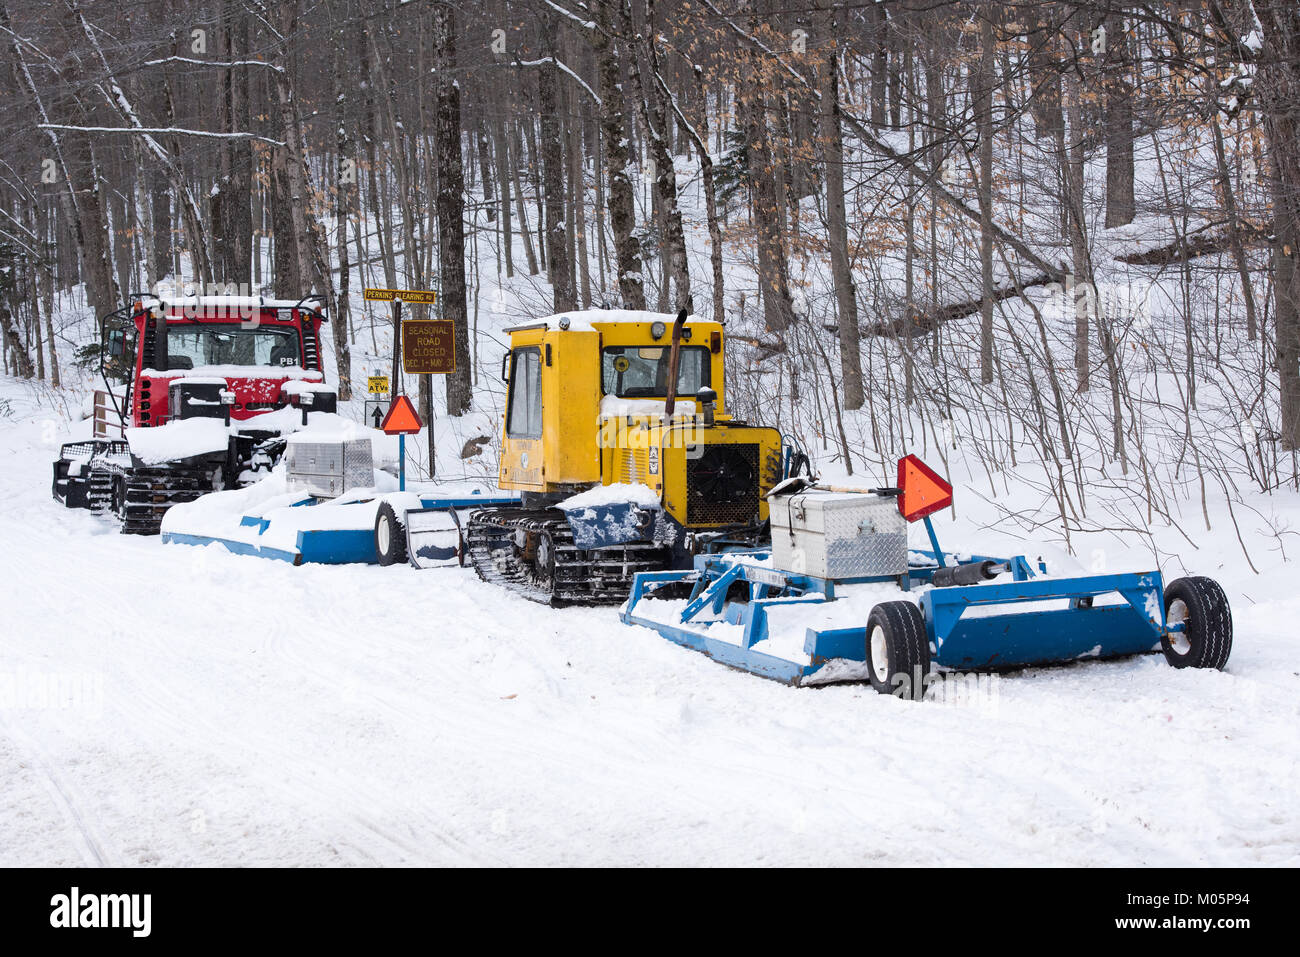 Two snowmobile trail groomers, a yellow Bombardier and a red Pisten Bully, parked on the Perkins Clearing road in the Adirondacks. Stock Photo